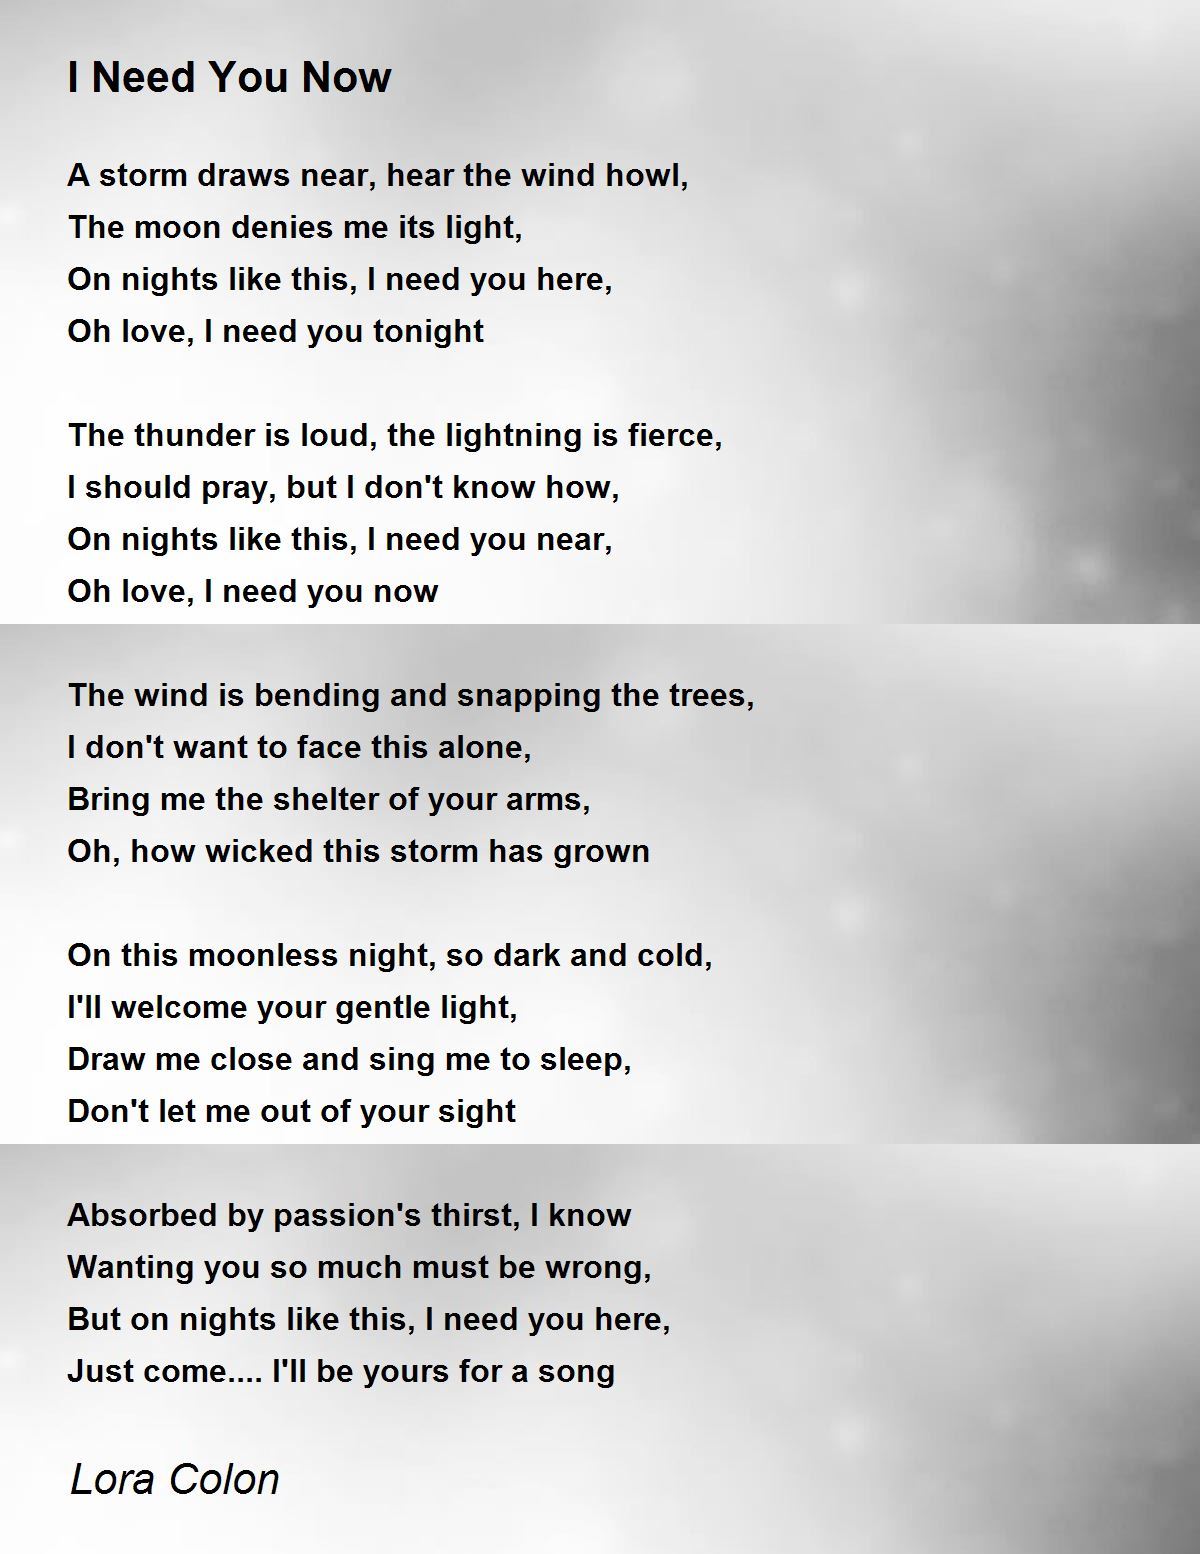 I Need You Now - I Need You Now Poem by Lora Colon